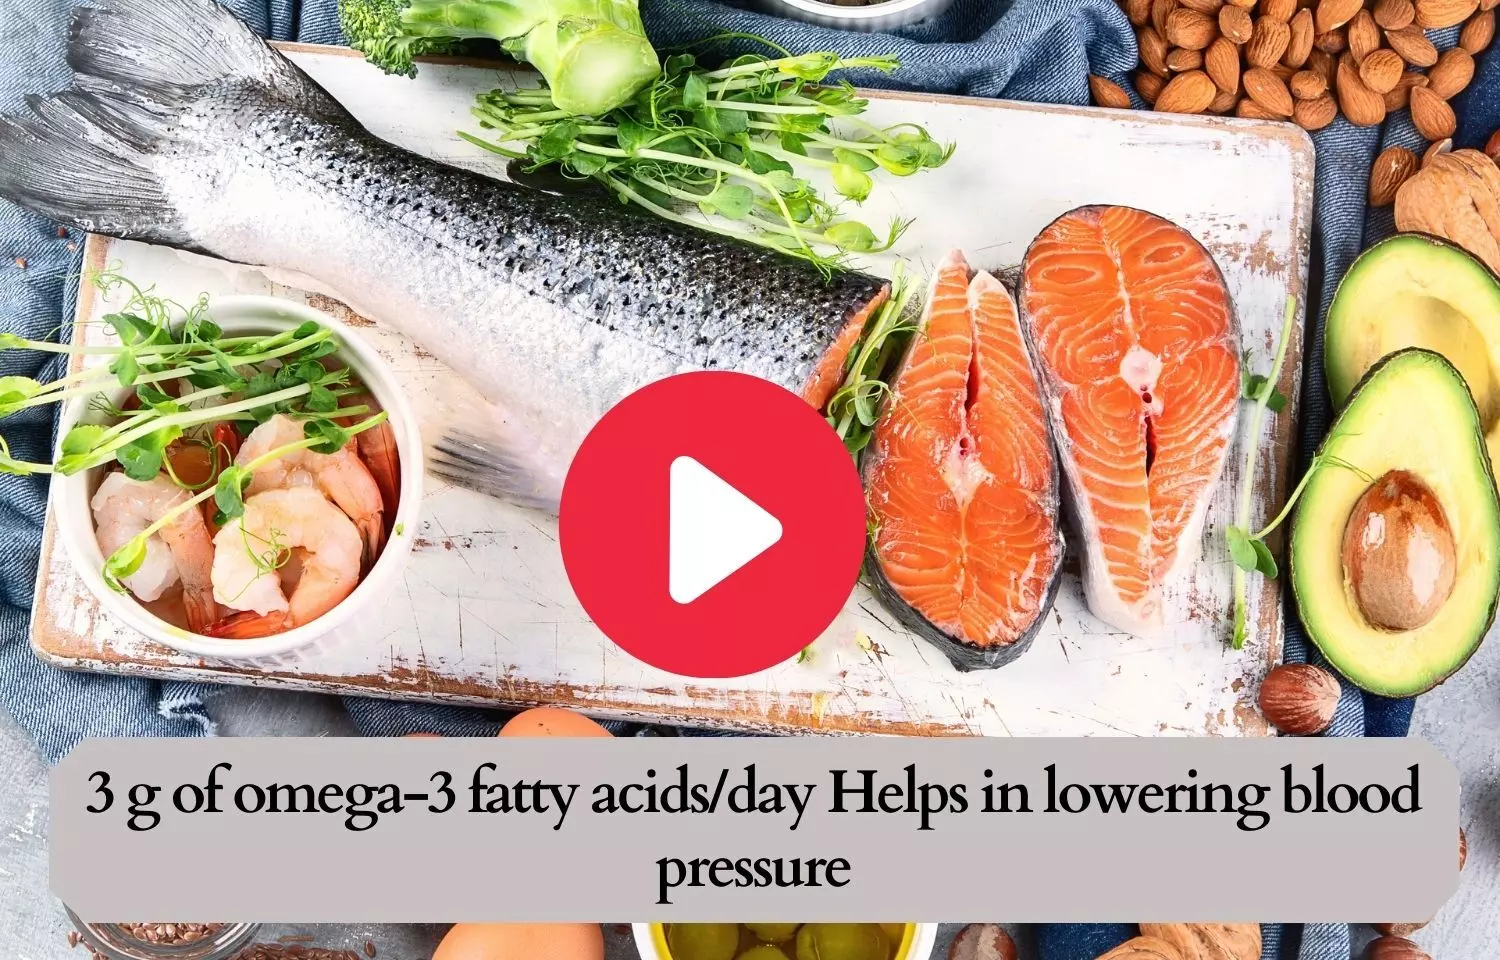 3 g of omega-3 fatty acids/day Helps in lowering blood pressure